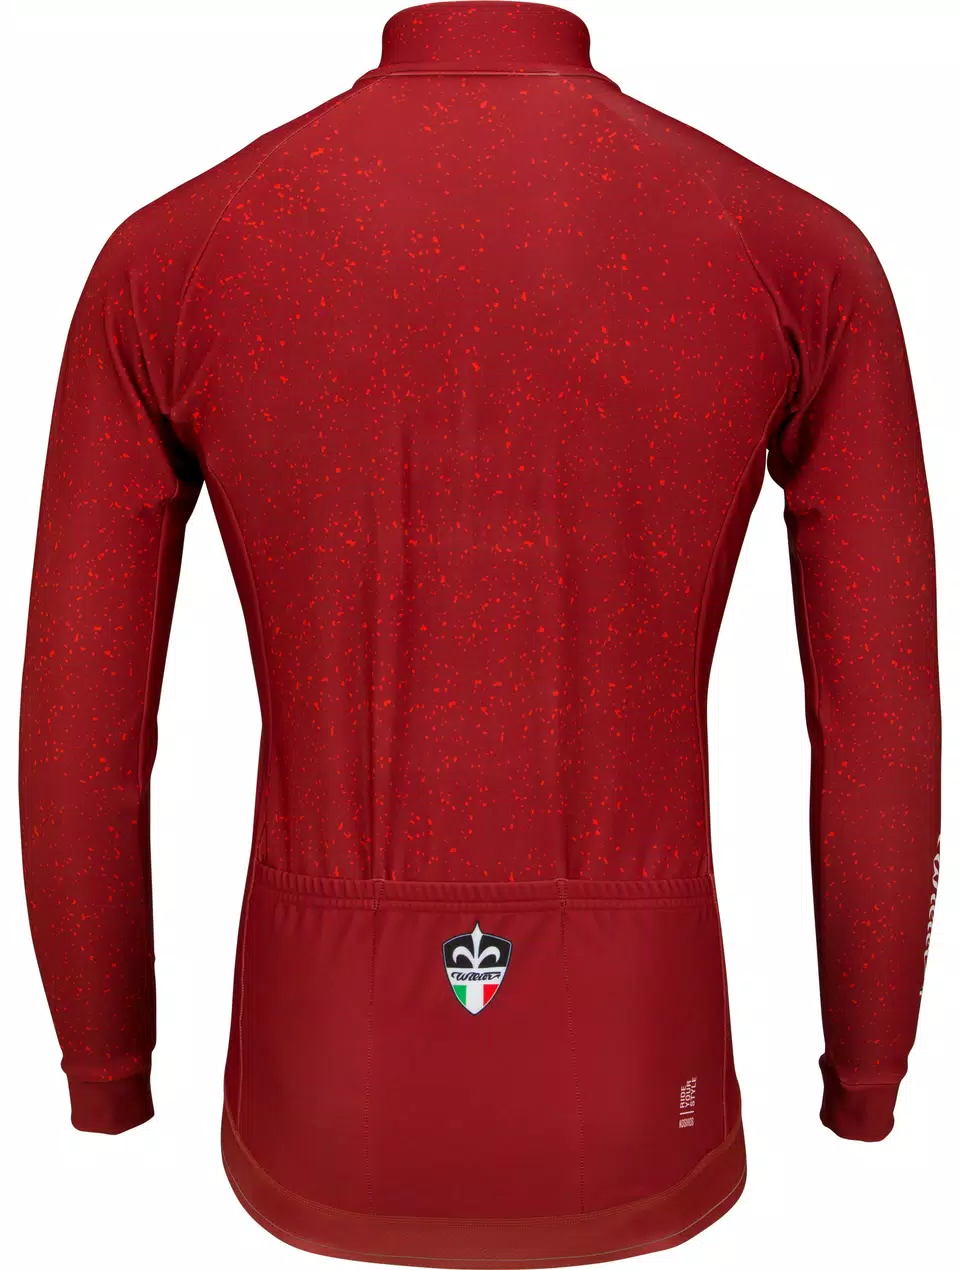 Maillot mujer Wilier Cycling Club rojo, Wilier Triestina